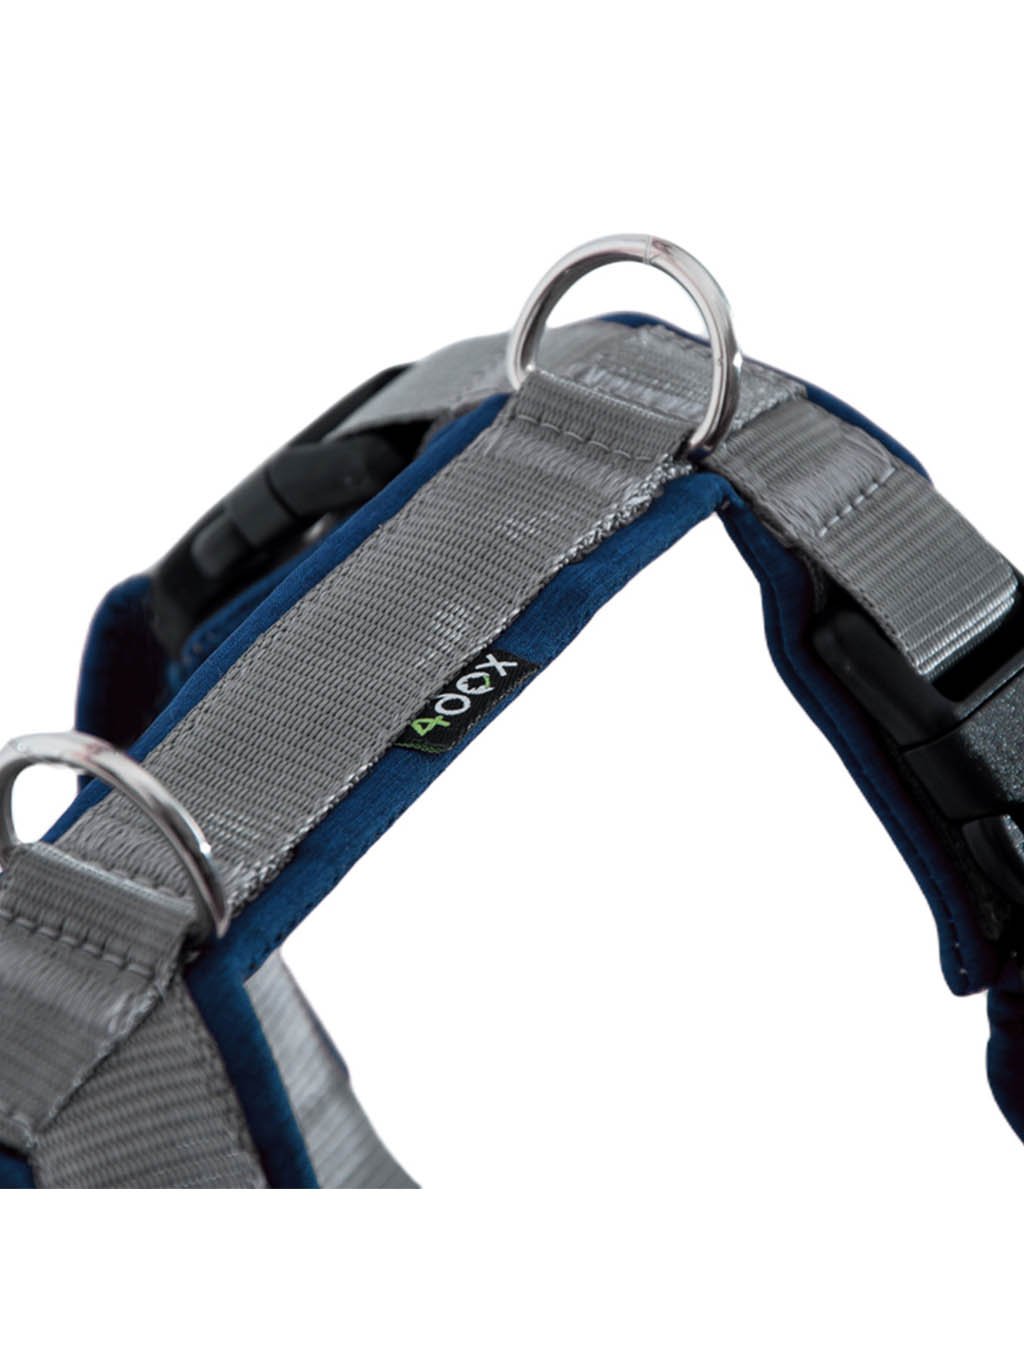 Comfort plus harness - silver - blueberry 4dox